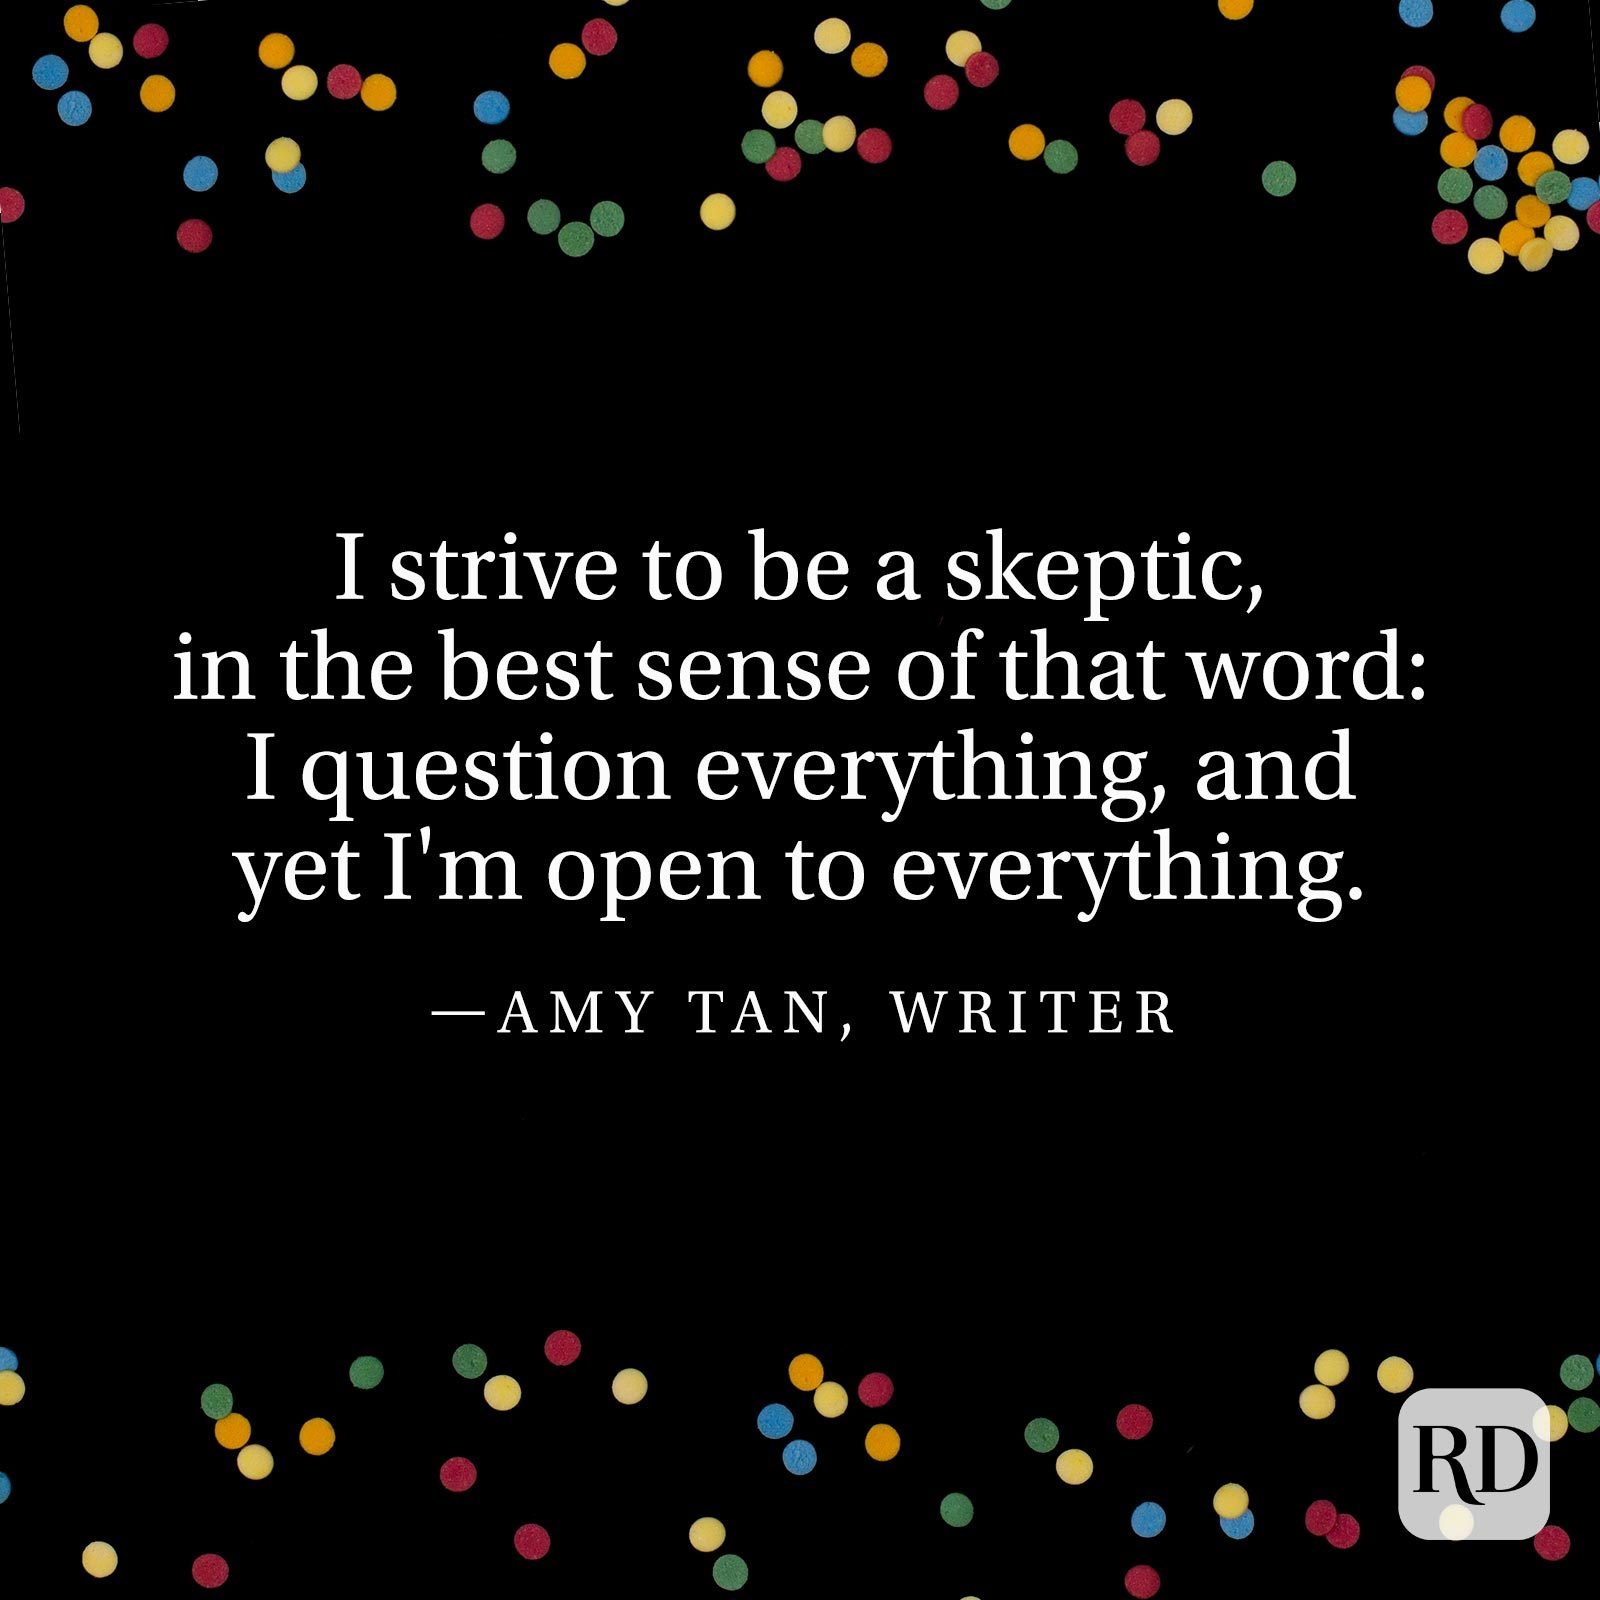 "I strive to be a skeptic, in the best sense of that word: I question everything, and yet I'm open to everything" —Amy Tan, writer.